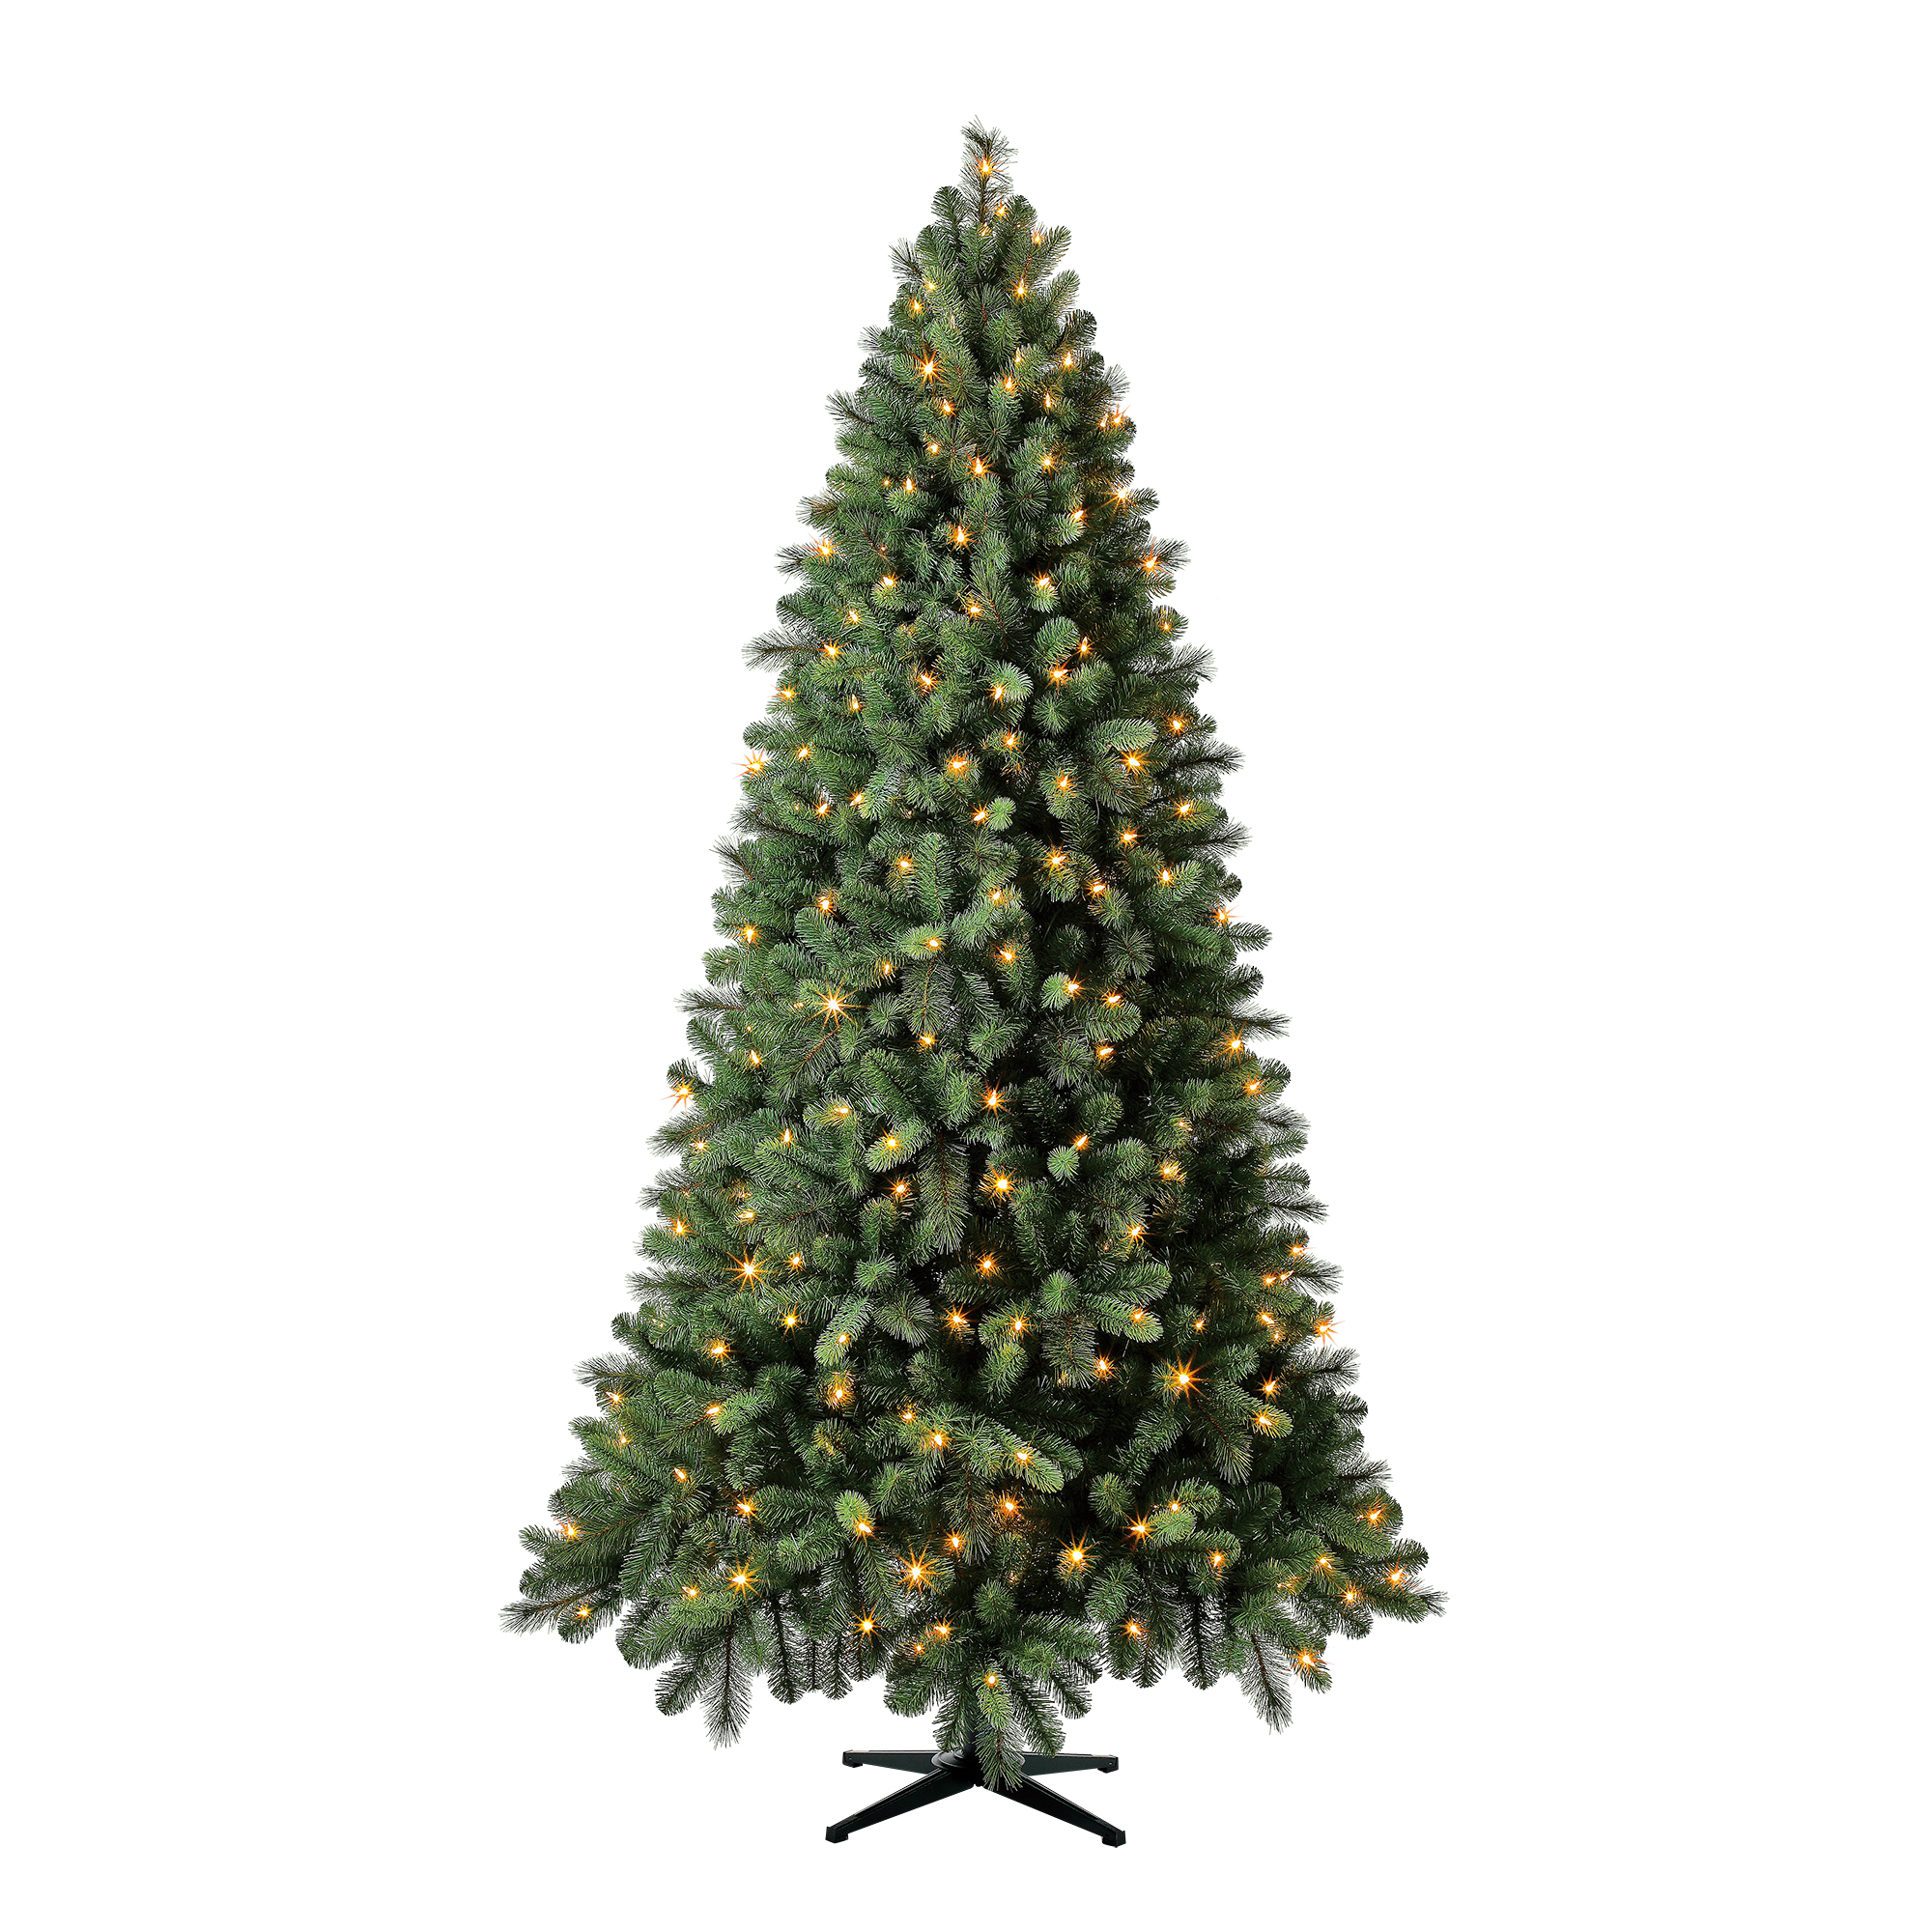 Holiday Time Pre-Lit Norwich Spruce Artificial Christmas Tree, Color-Changing Lights, 7.5' - Walmart.com $68